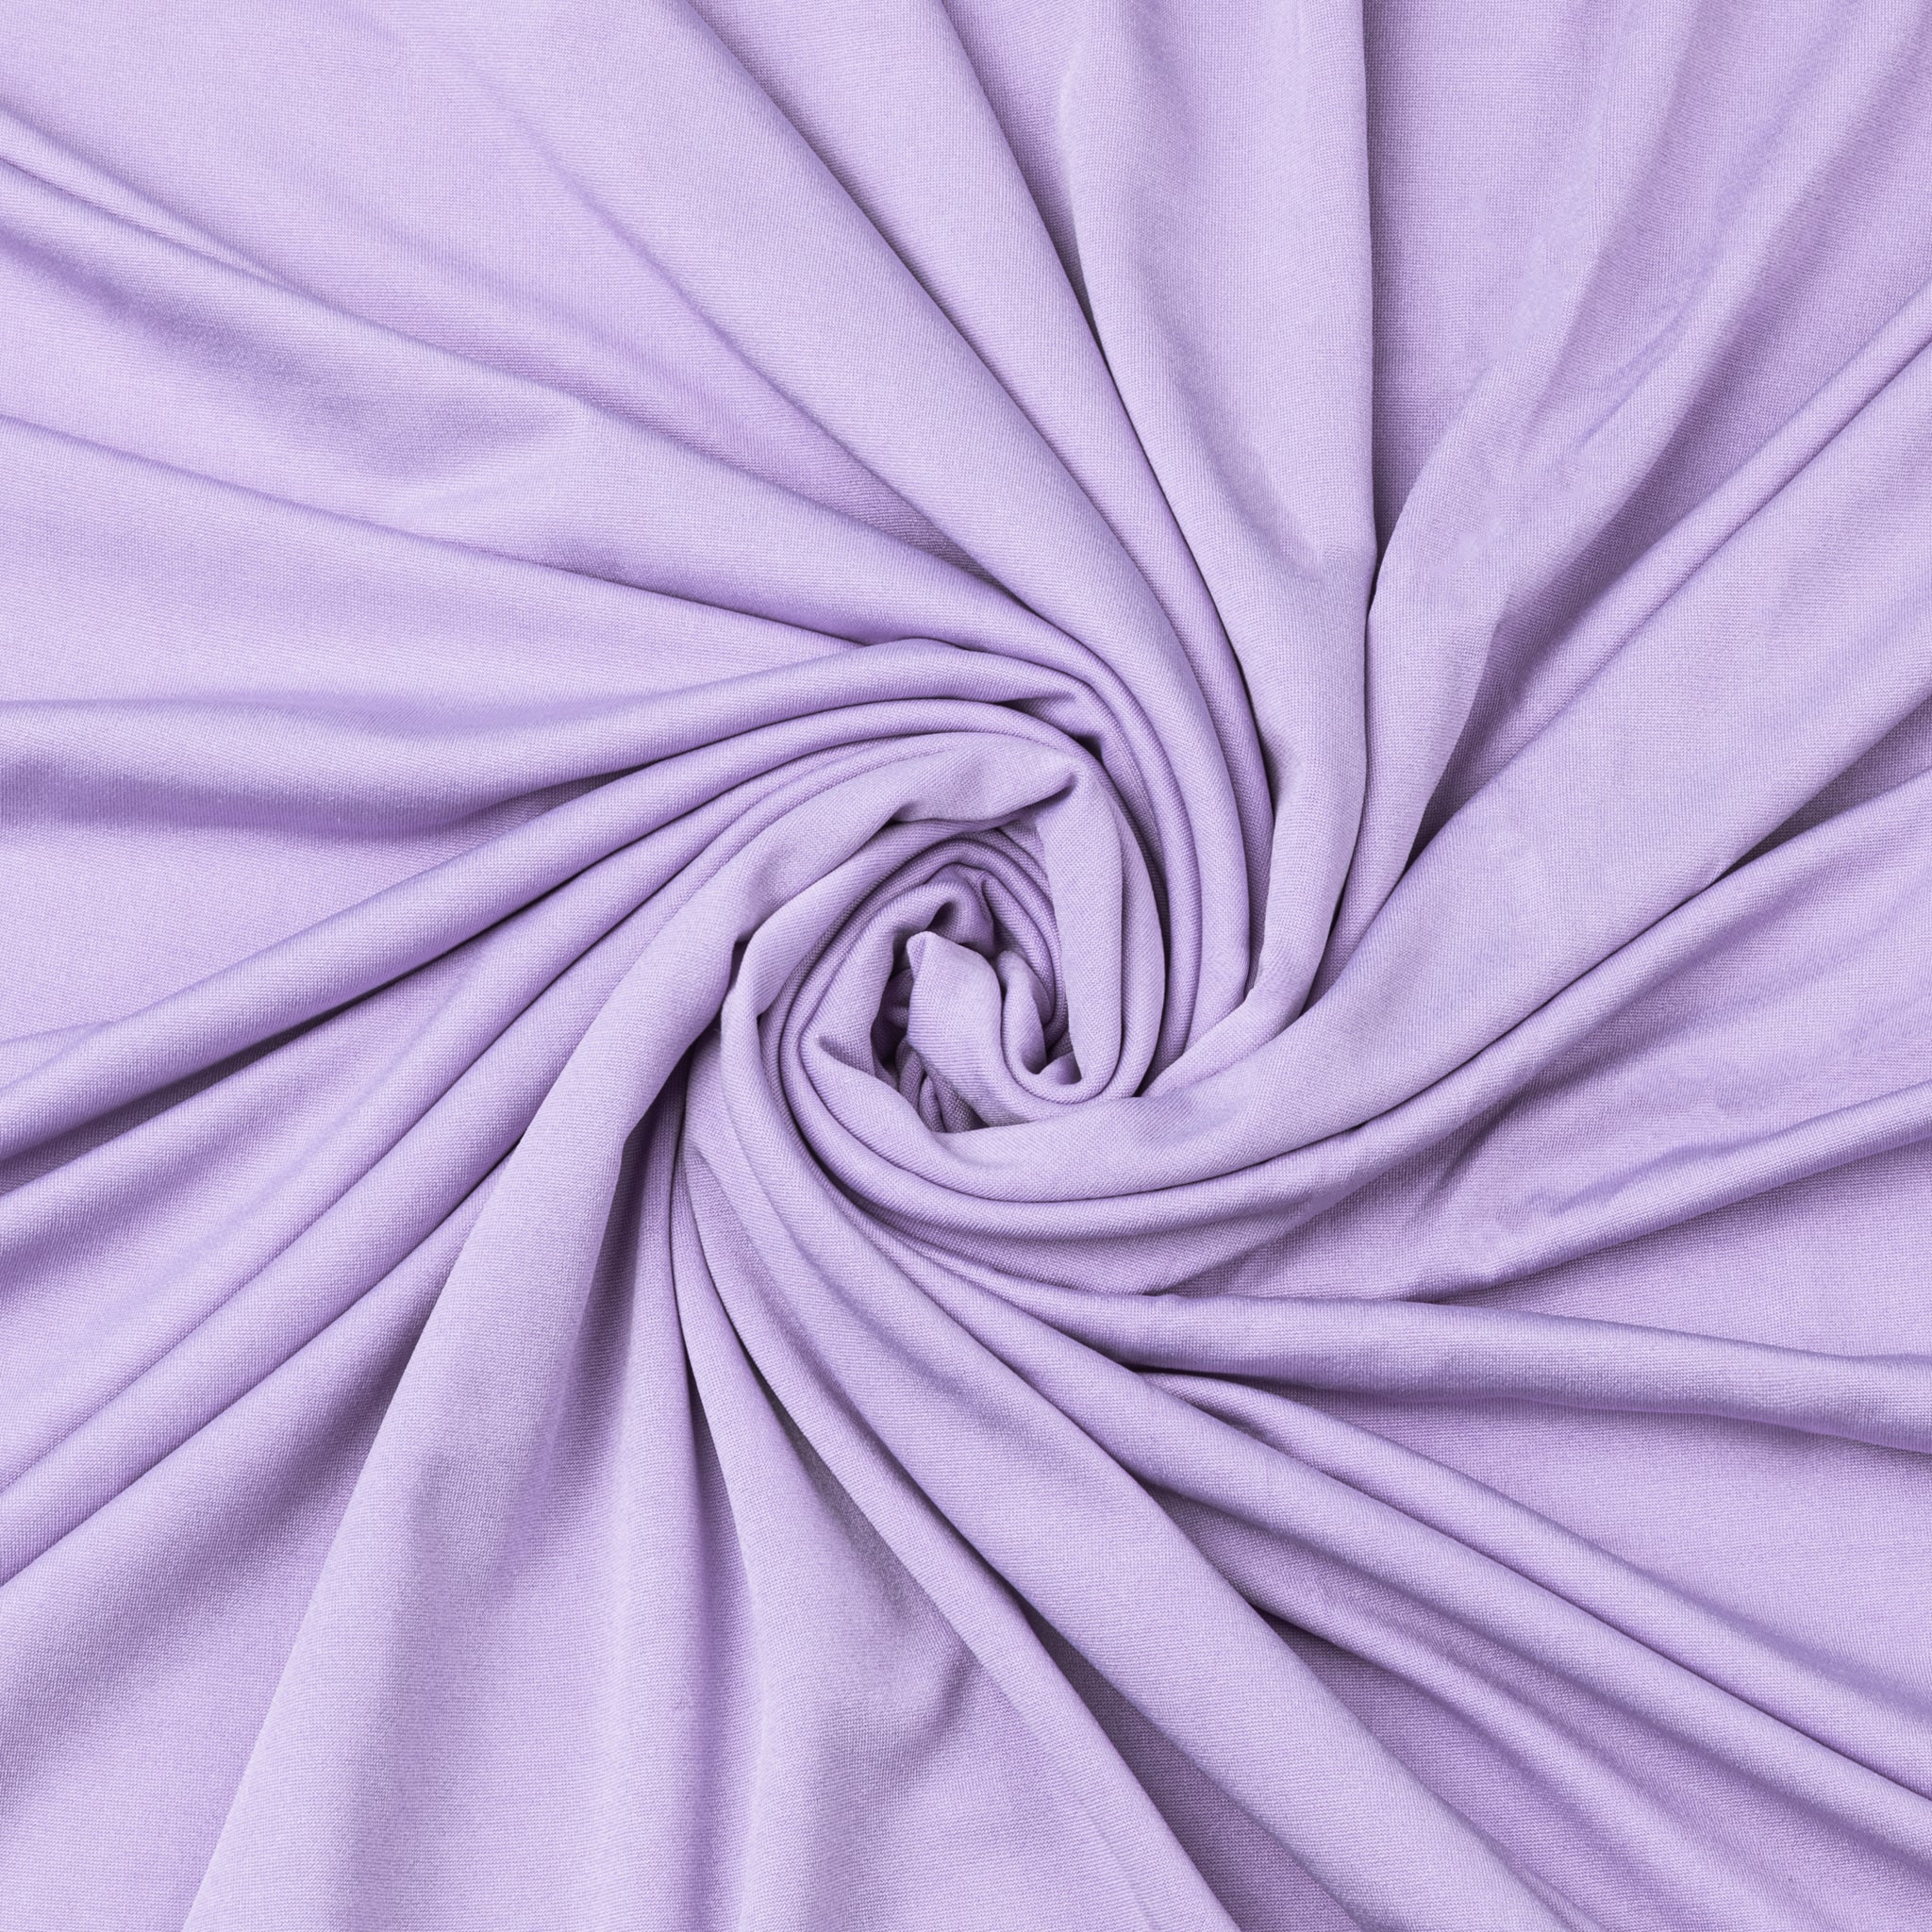 Spandex Fabric by the Yard